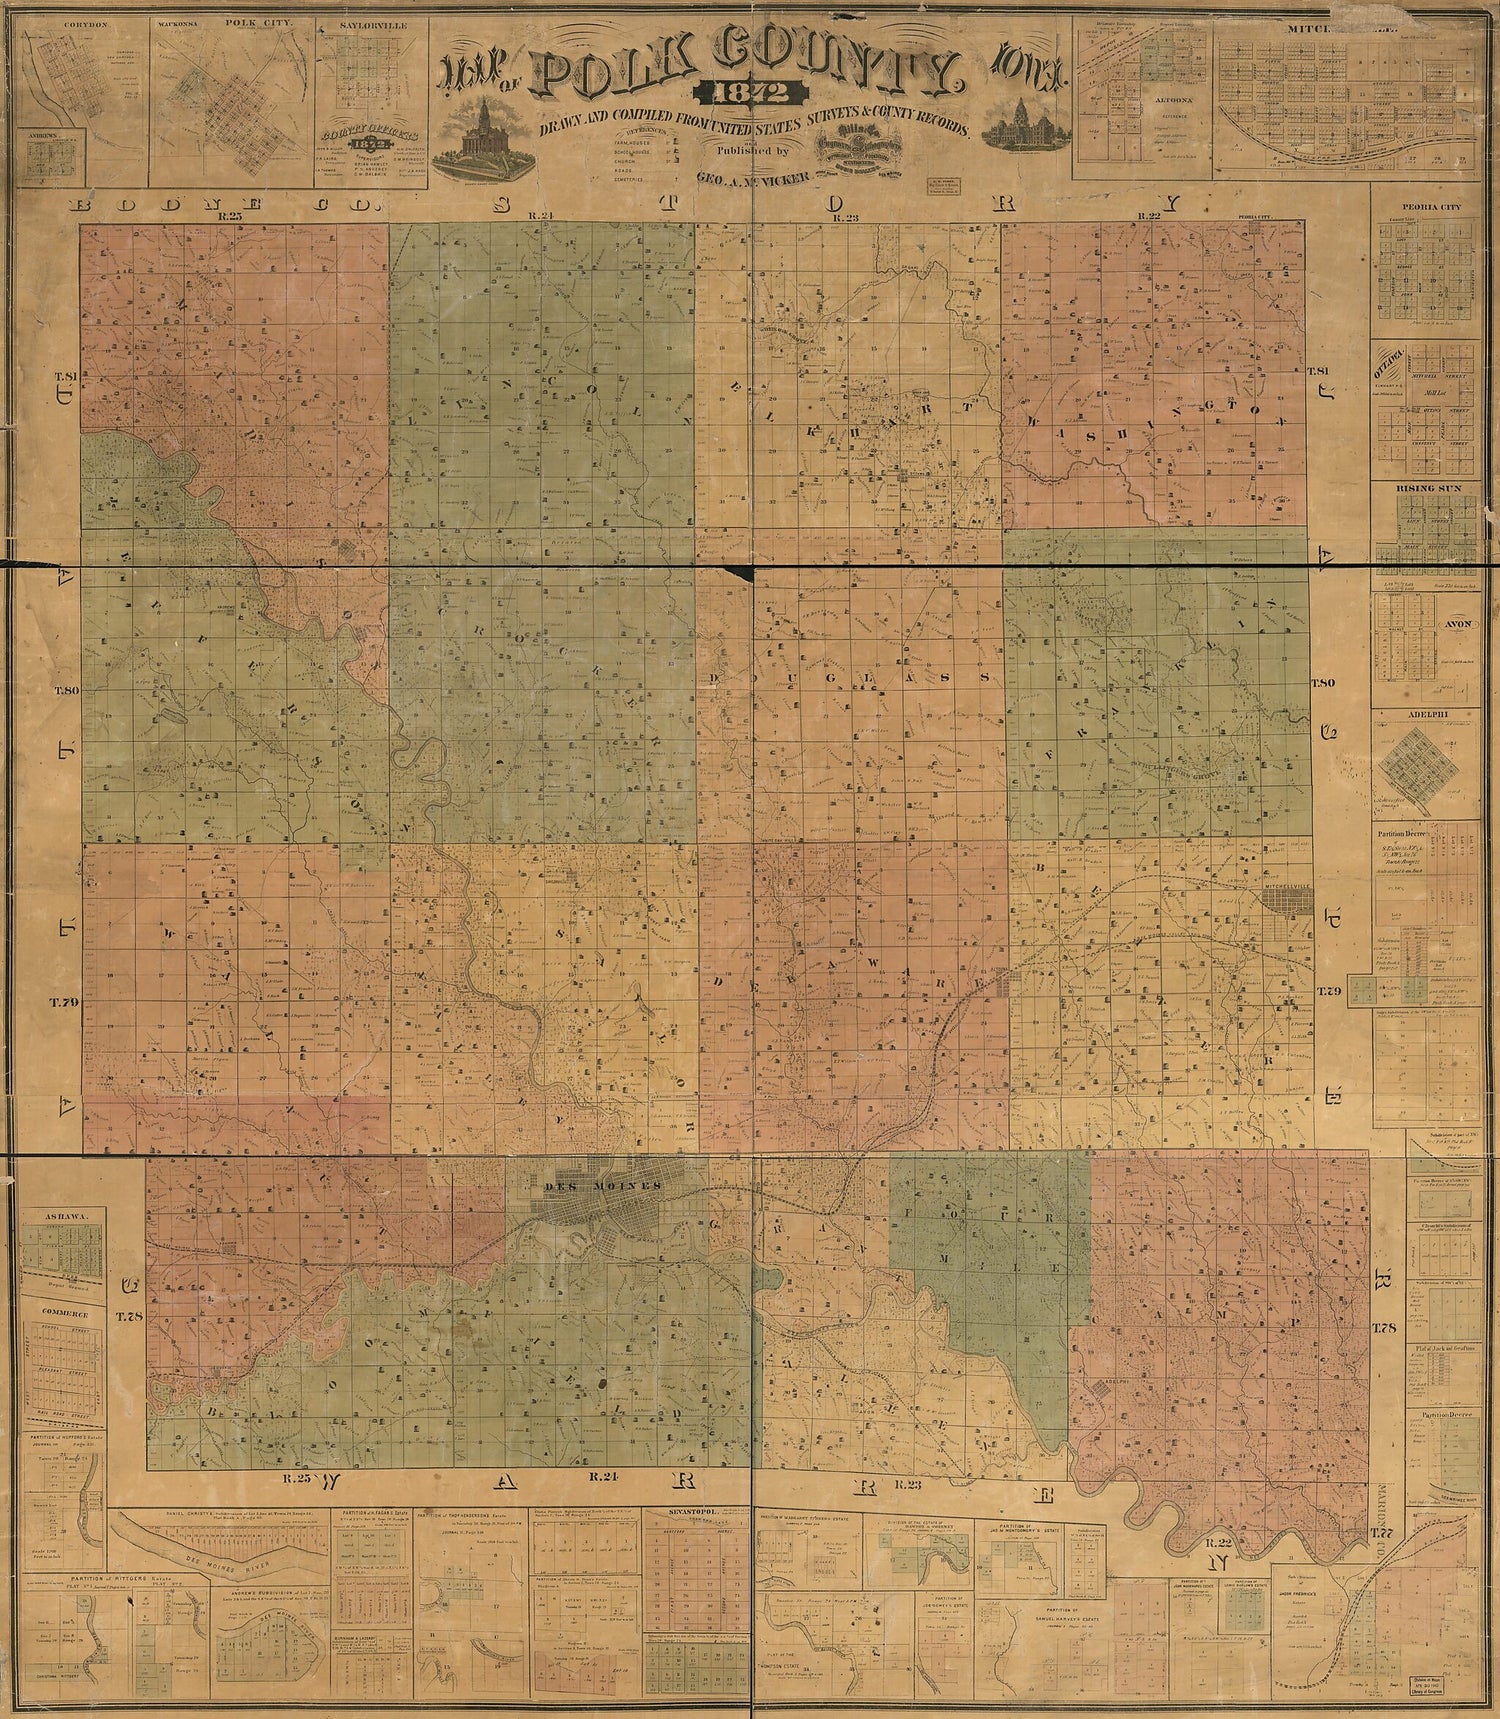 This old map of Map of Polk County, Iowa from 1872 was created by Geo. A. McVicker in 1872